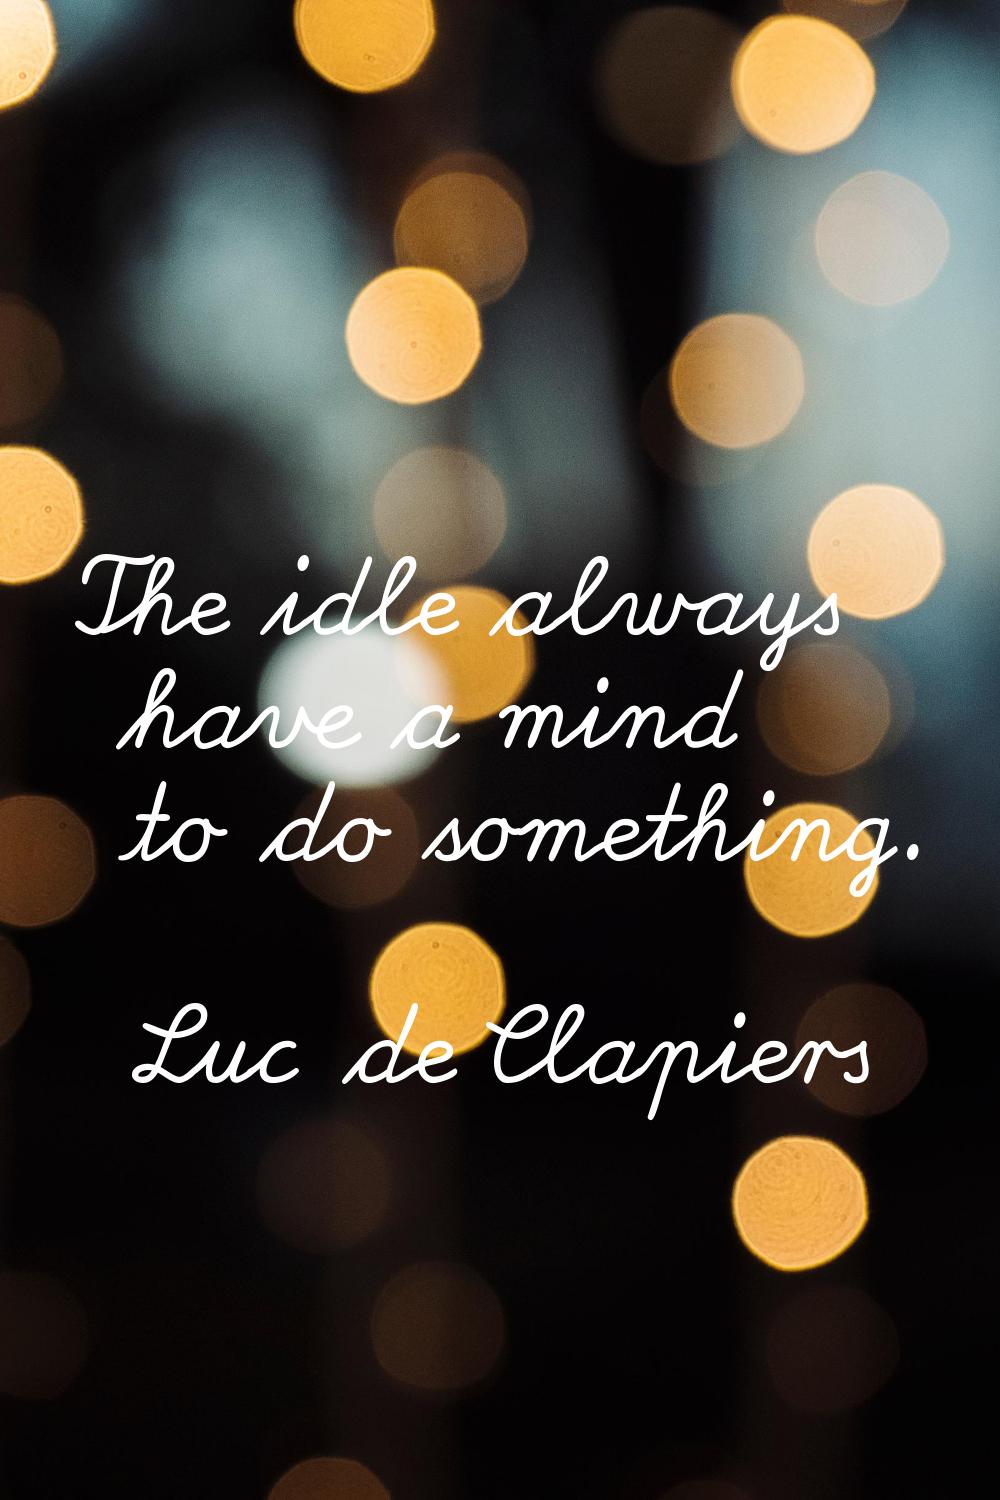 The idle always have a mind to do something.